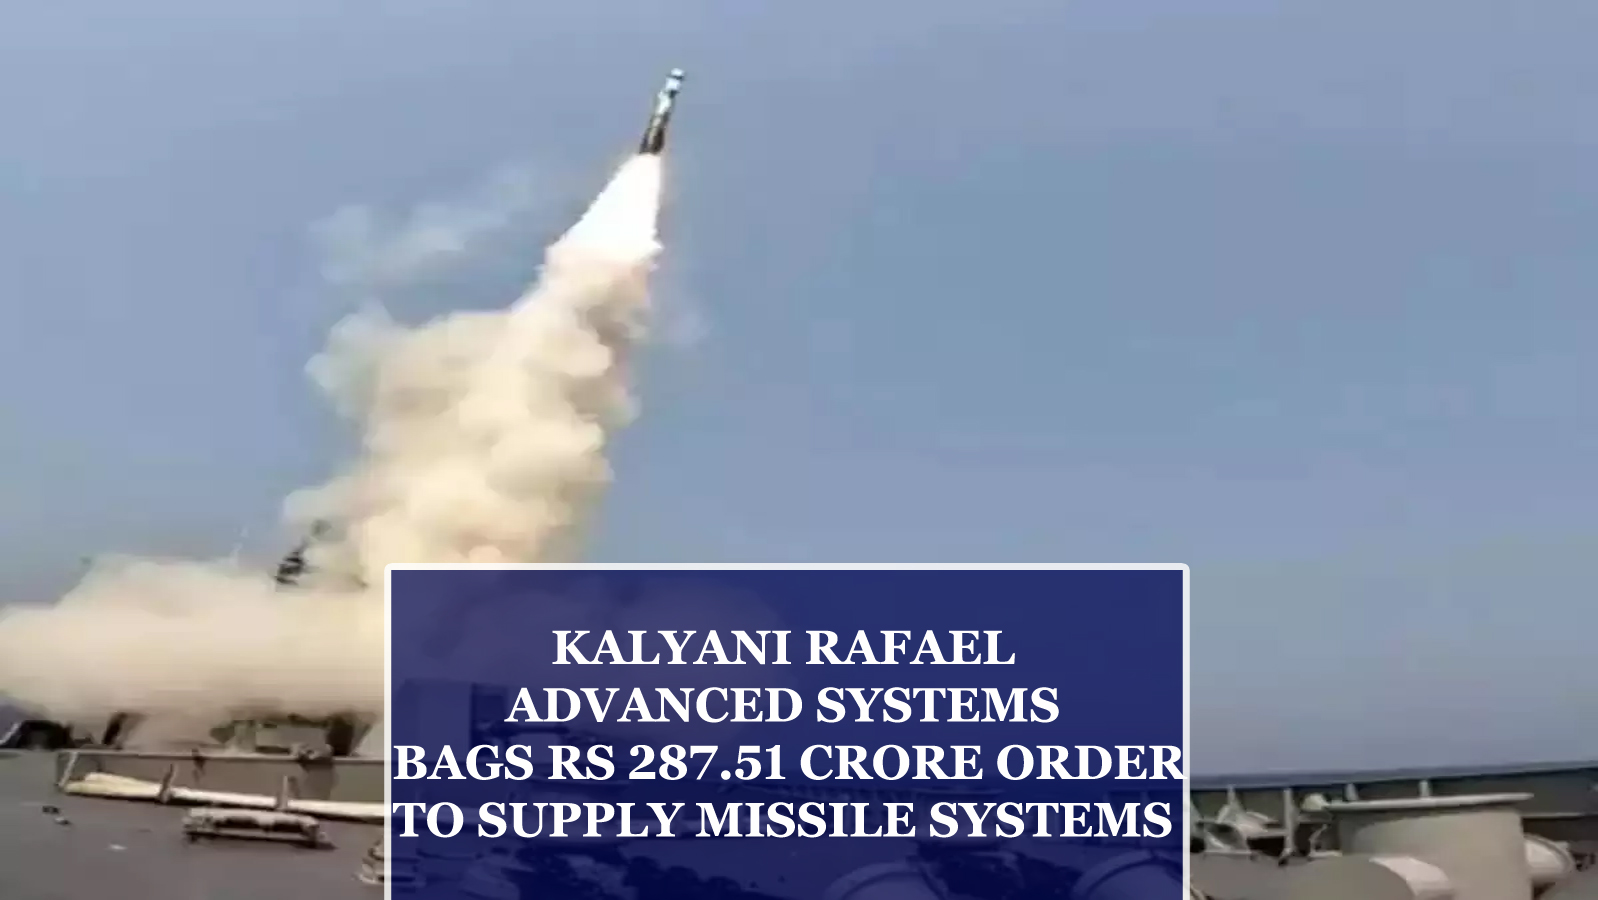 KALYANI RAFAEL ADVANCED SYSTEMS BAGS RS 287.51 CRORE ORDER TO SUPPLY MISSILE SYSTEMS